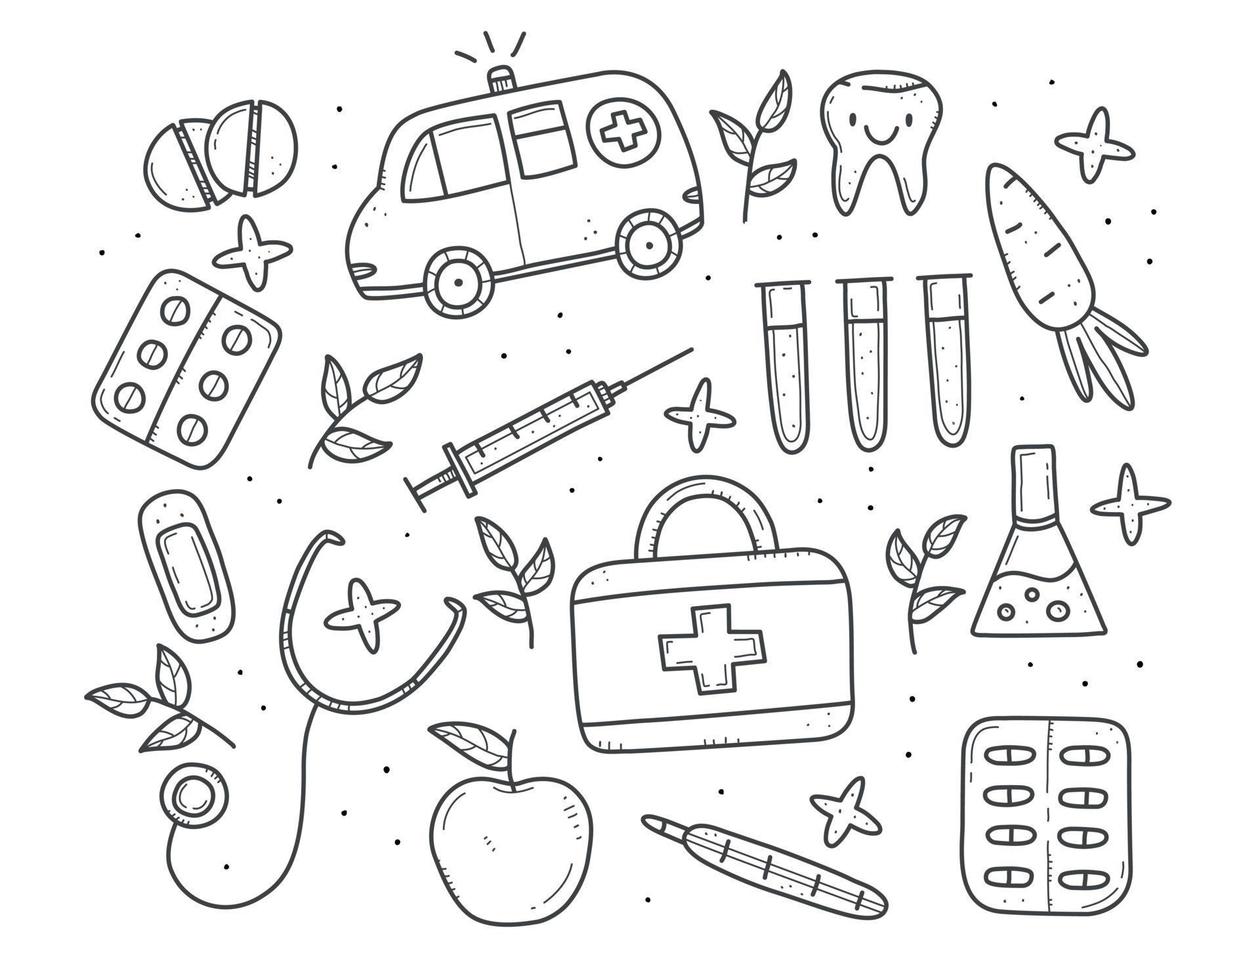 Set of black and white medical items in doodle style, thermometer, syringe, flask, pills, vitamins, ambulance. Vector doodle illustration. Objects isolated on white background.